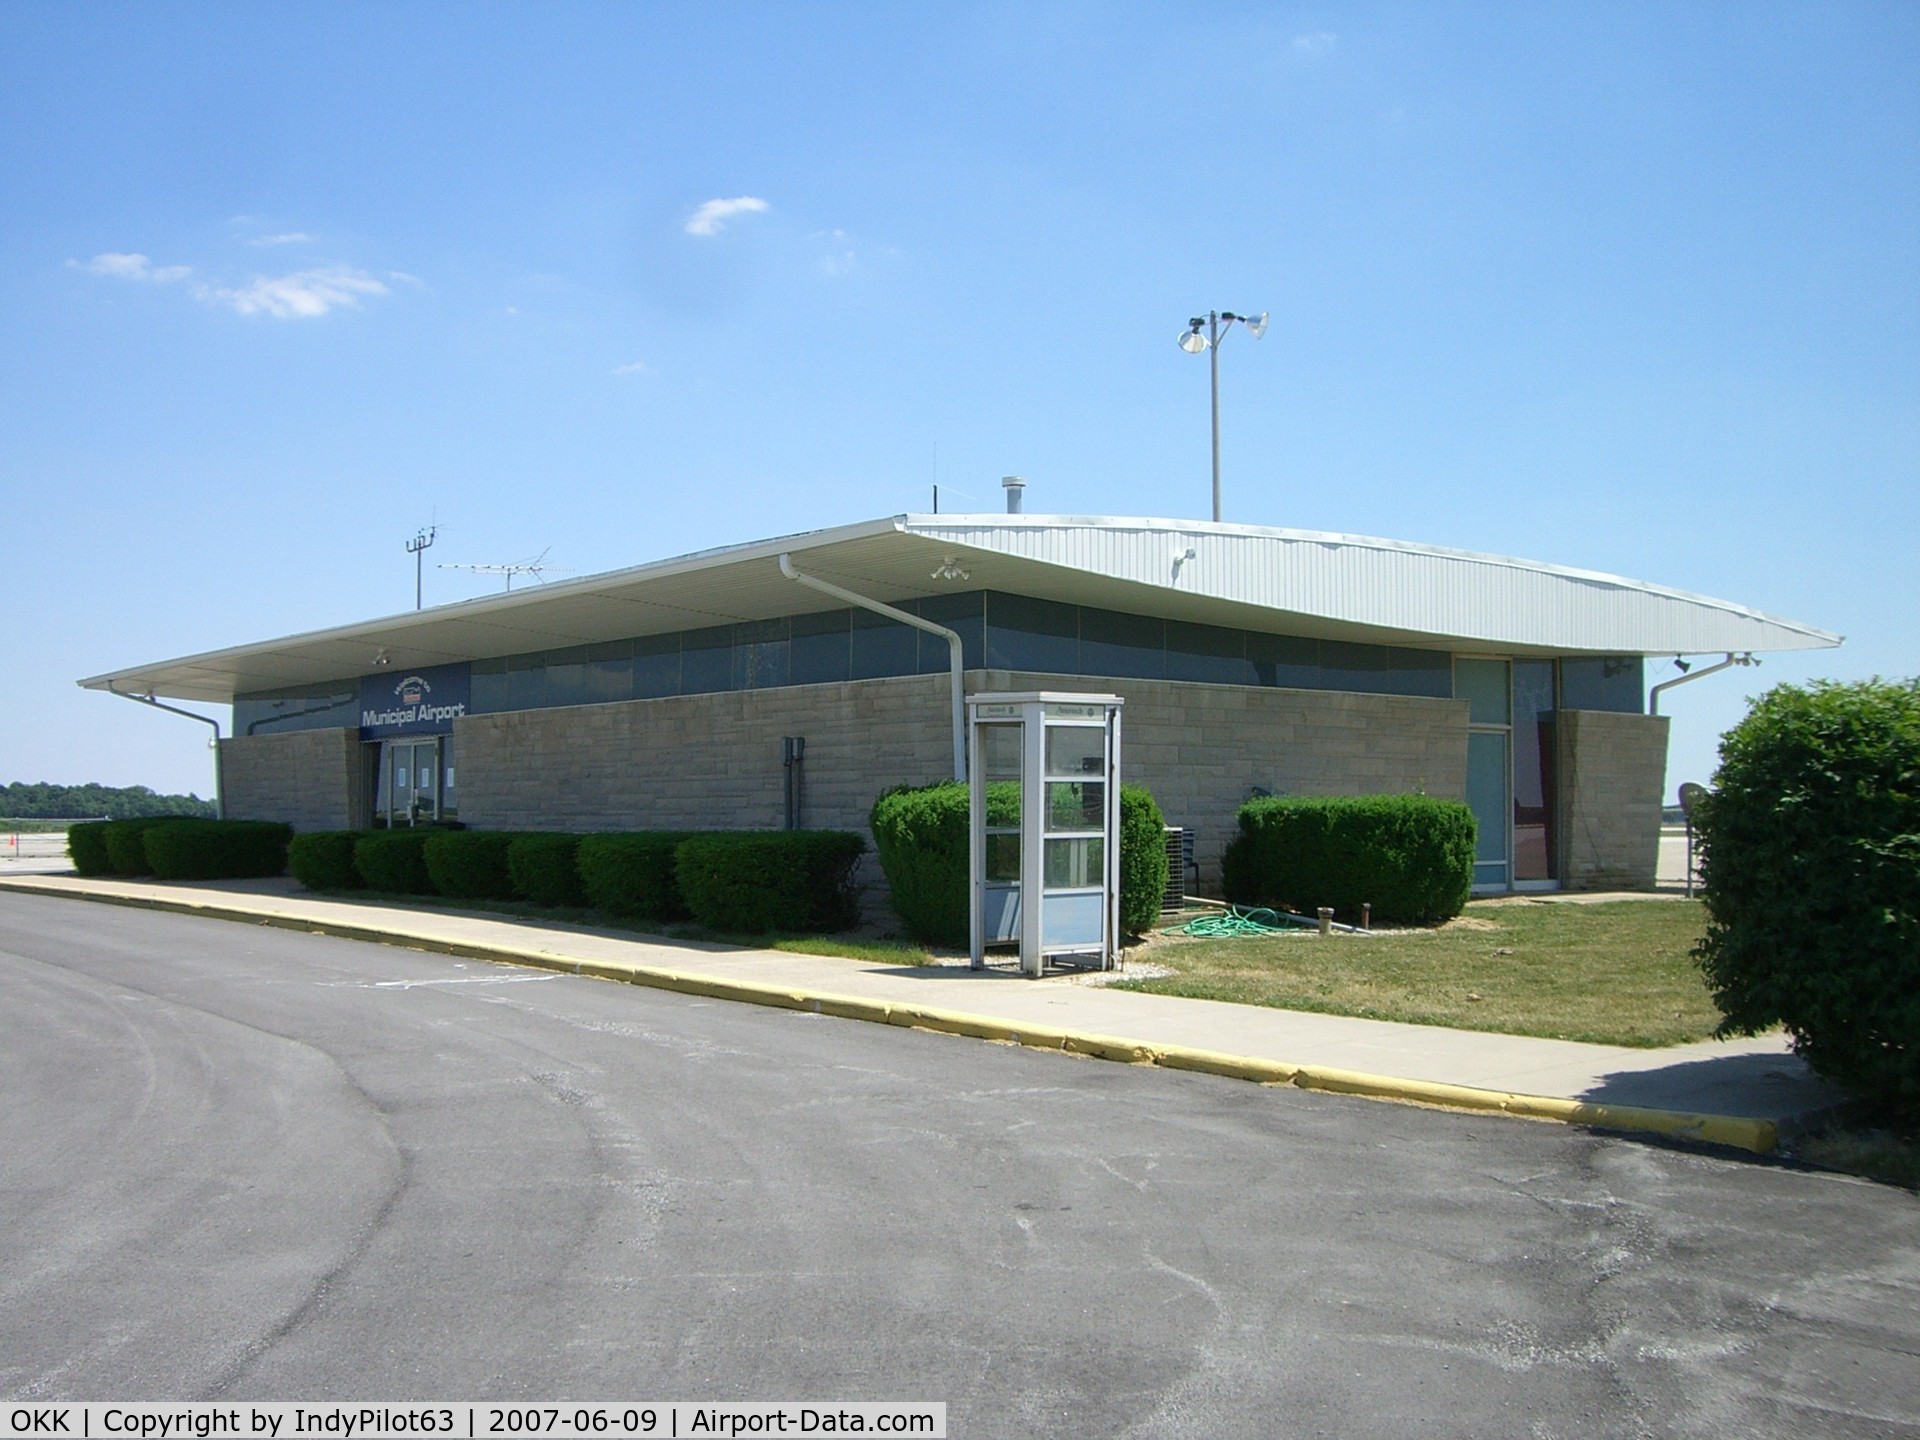 Kokomo Municipal Airport (OKK) - the unique FBO building, one of my favorites for a small airport.